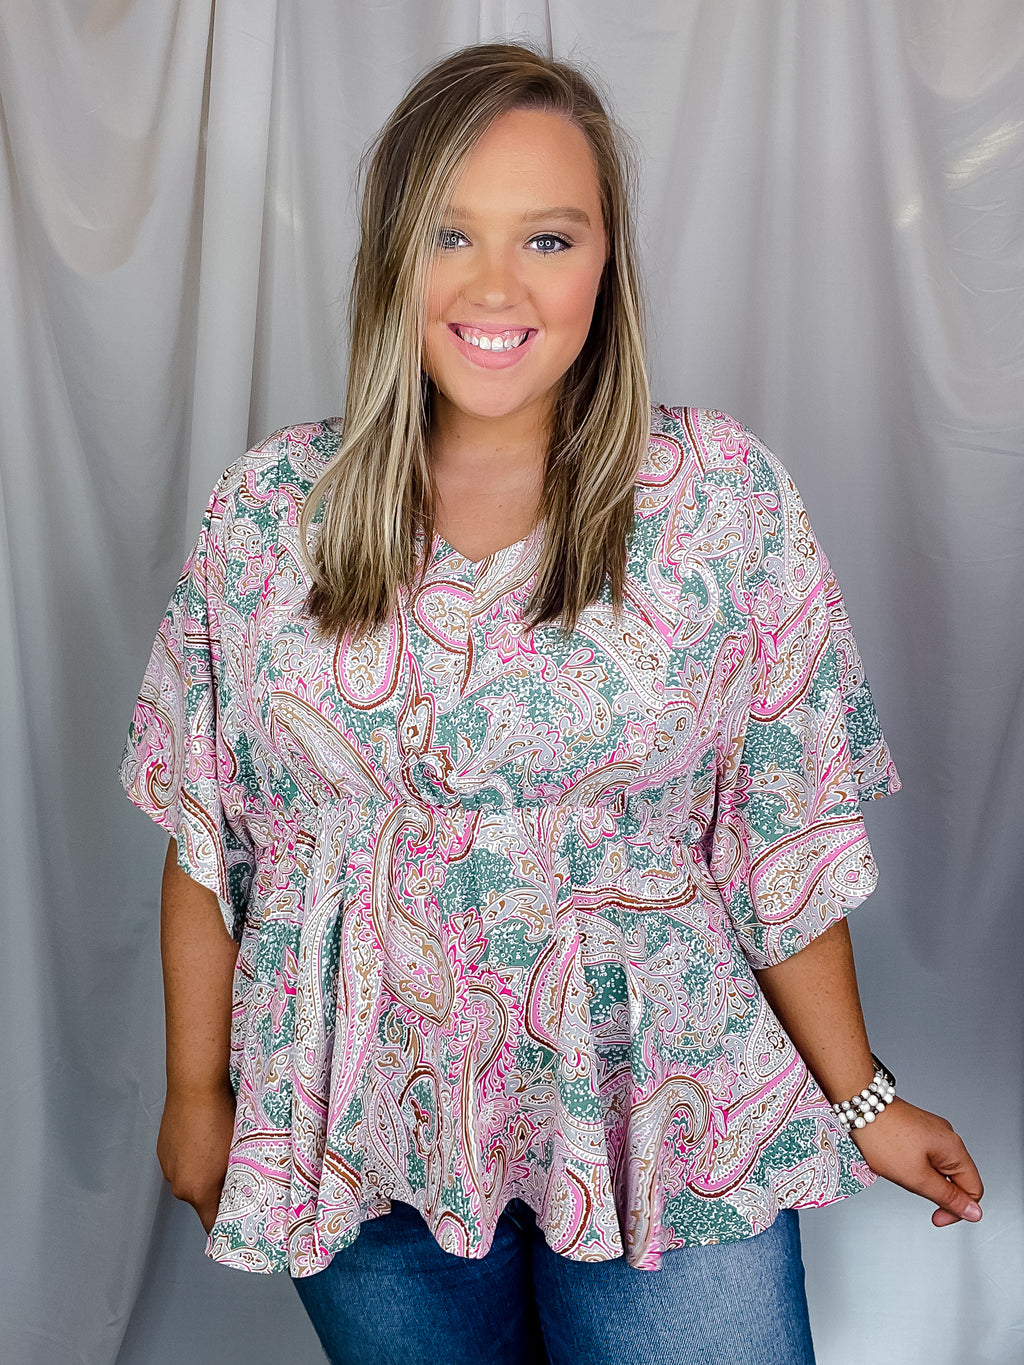 Top features a paisley printed detail, elastic waist band, short dolman sleeves, V-neck line and runs true to size! 